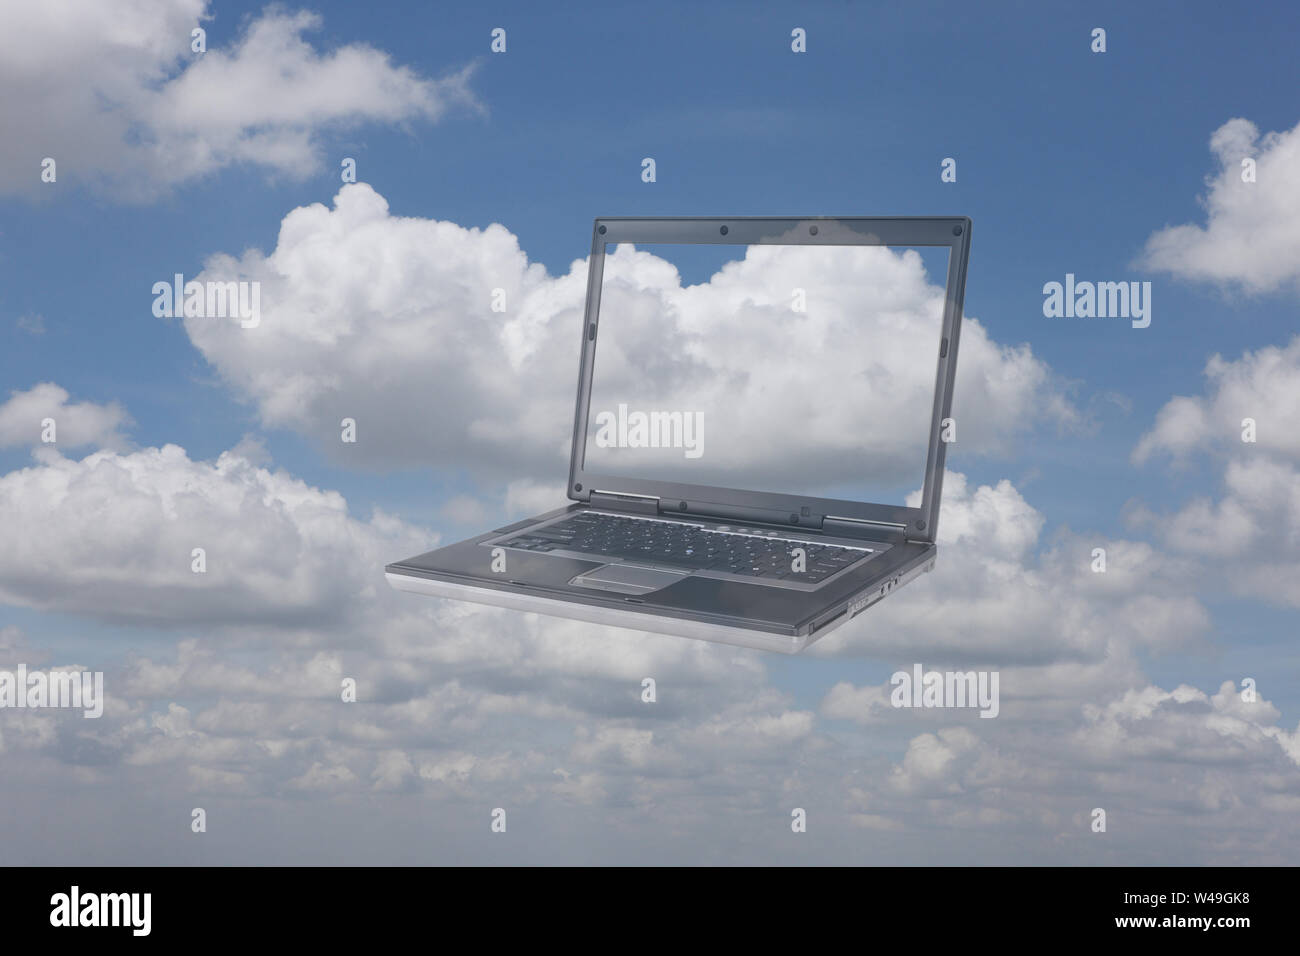 Laptop floating in clouds Stock Photo